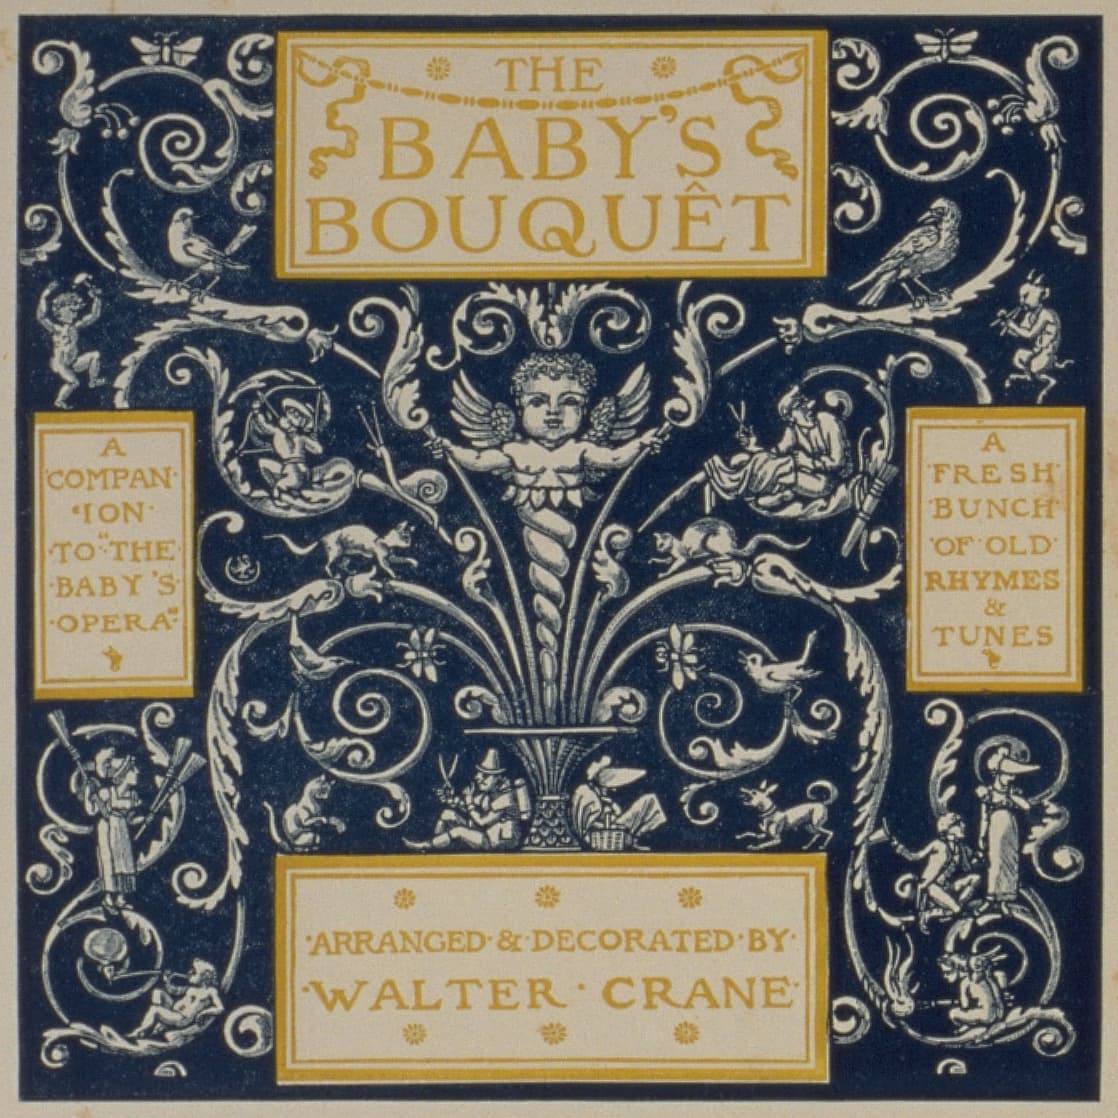 Front cover of THE BABY’S BOUQUÊT (page 70 of Triplets)